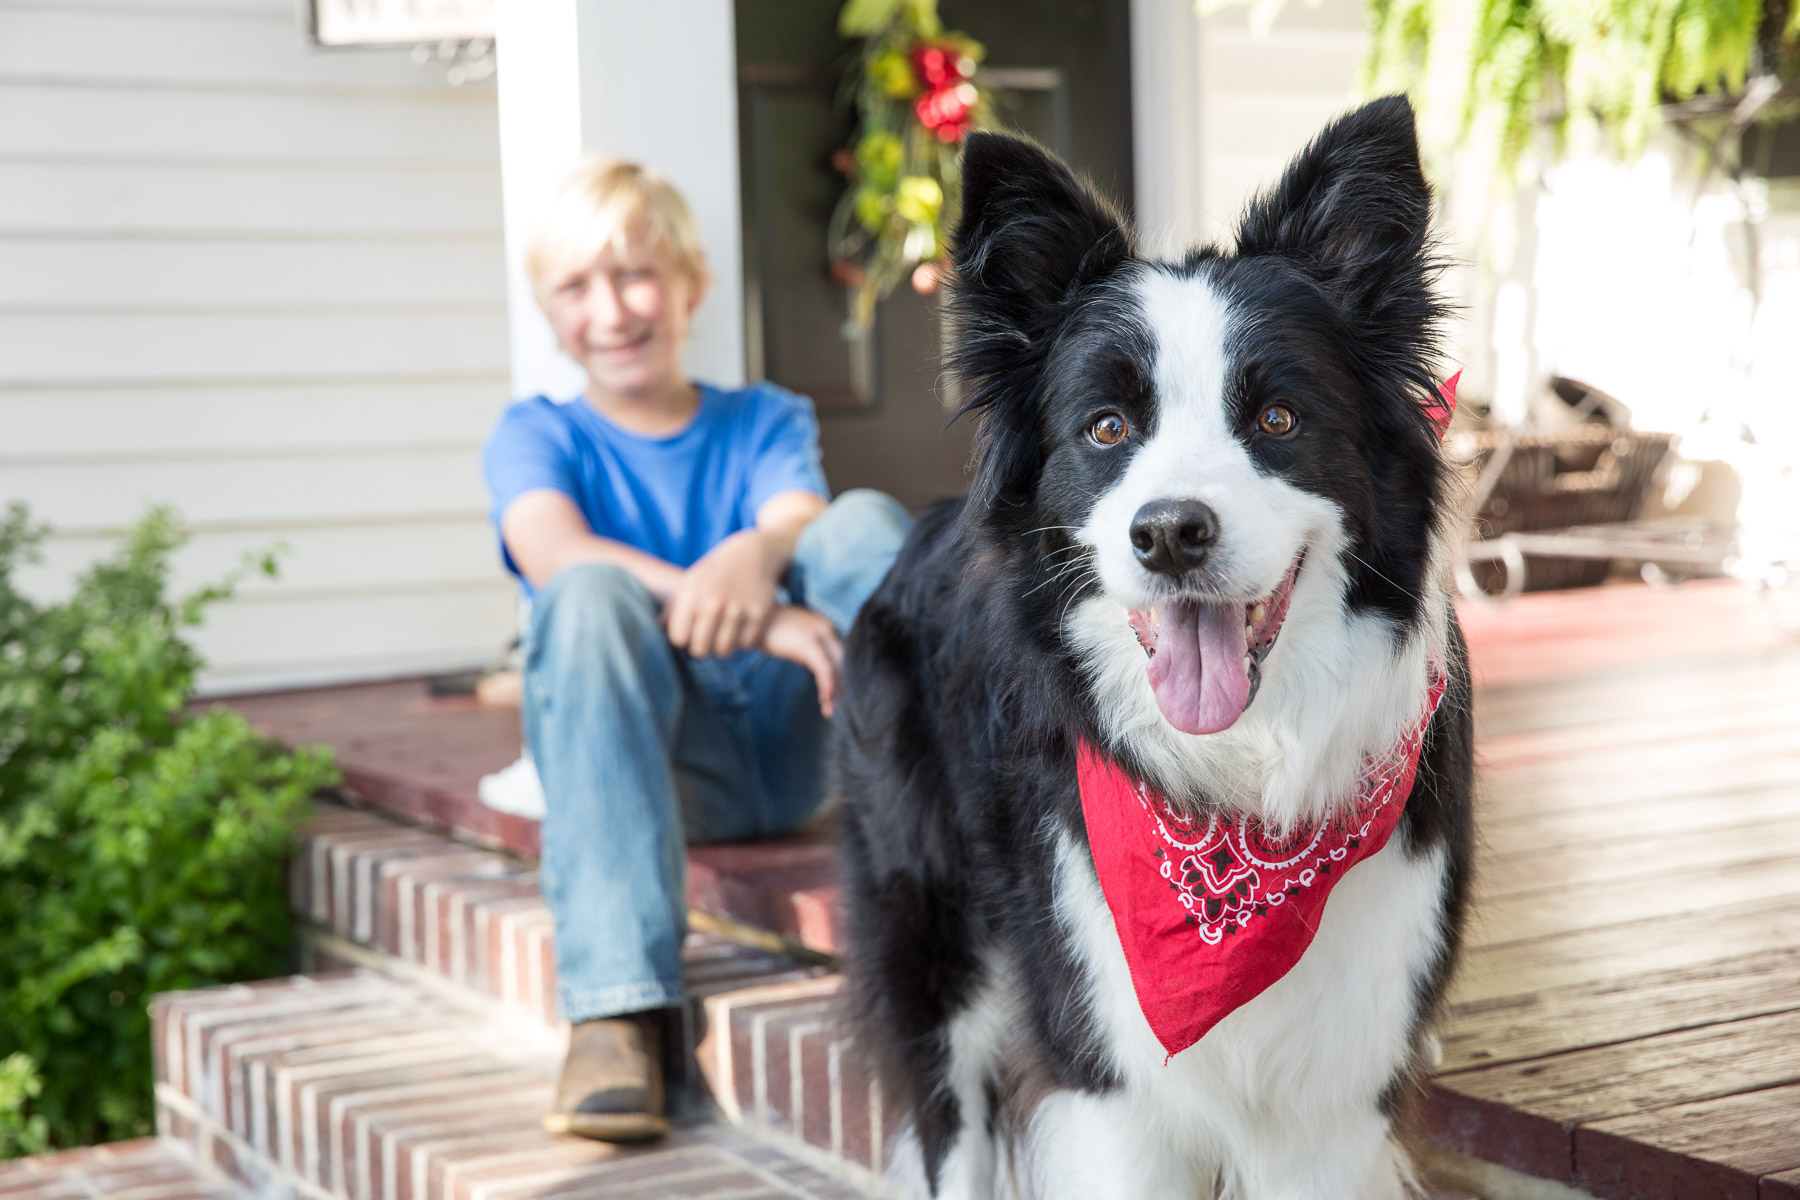 kid-with-dog-looking-camera-smiling-dog-portraits.jpg